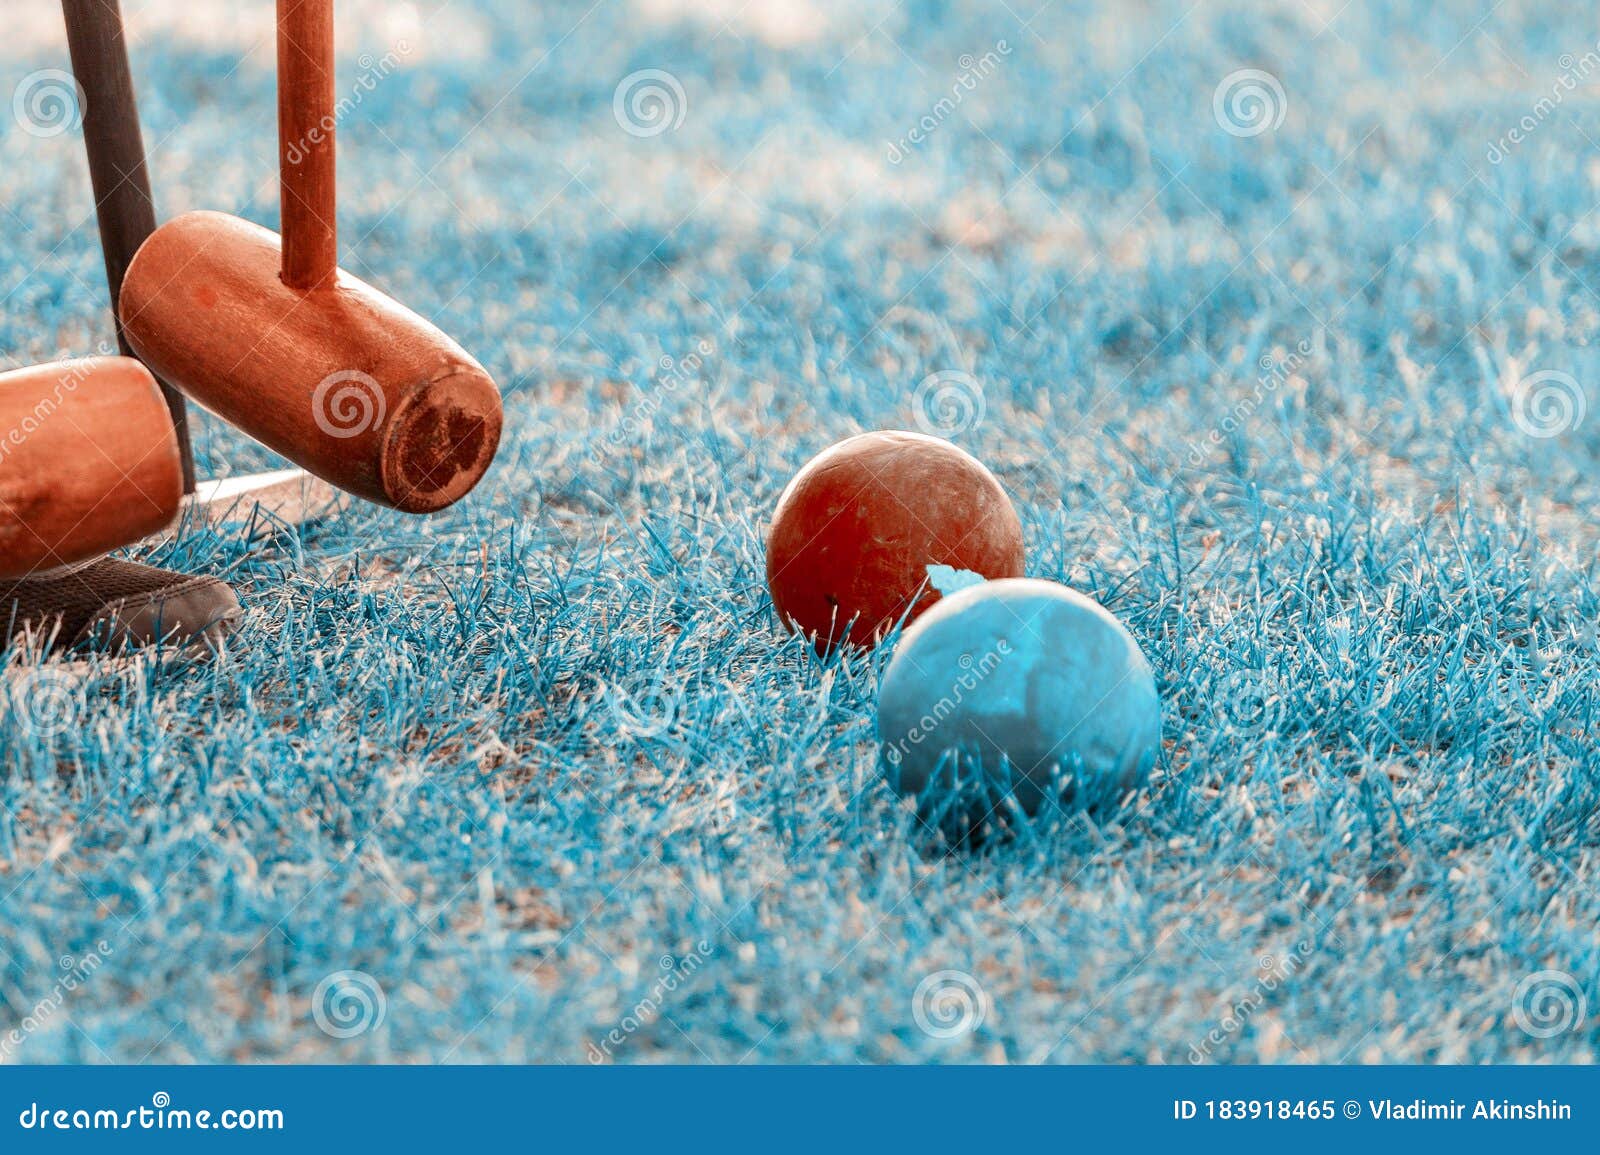 Croquet Equipment On The Green Lawn Stock Image - Image of ...